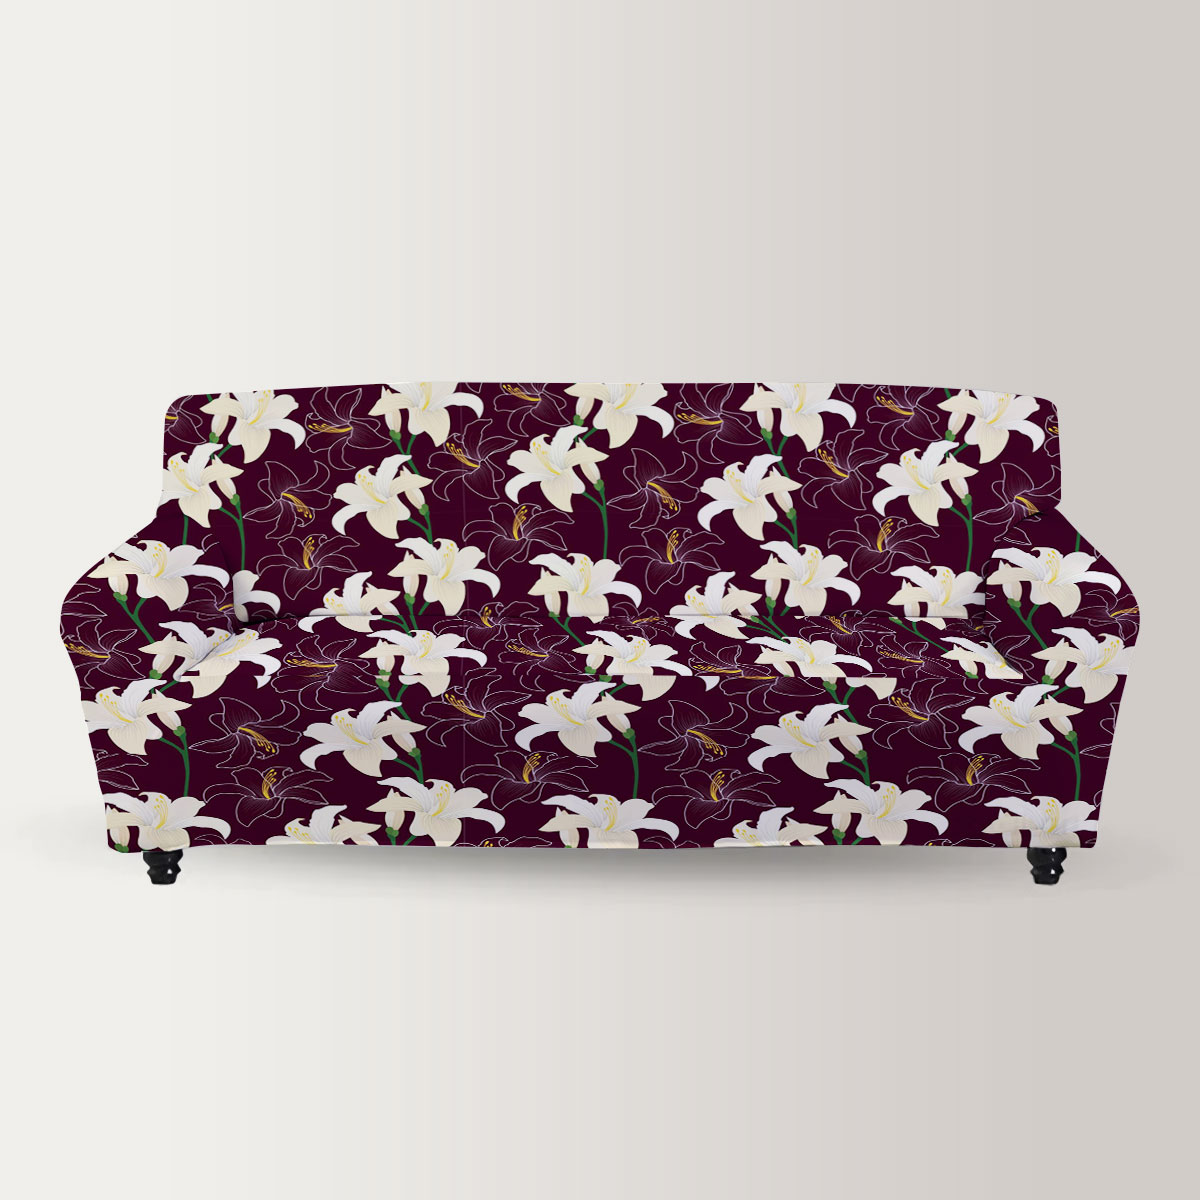 White Lily Seamless Pattern Sofa Cover